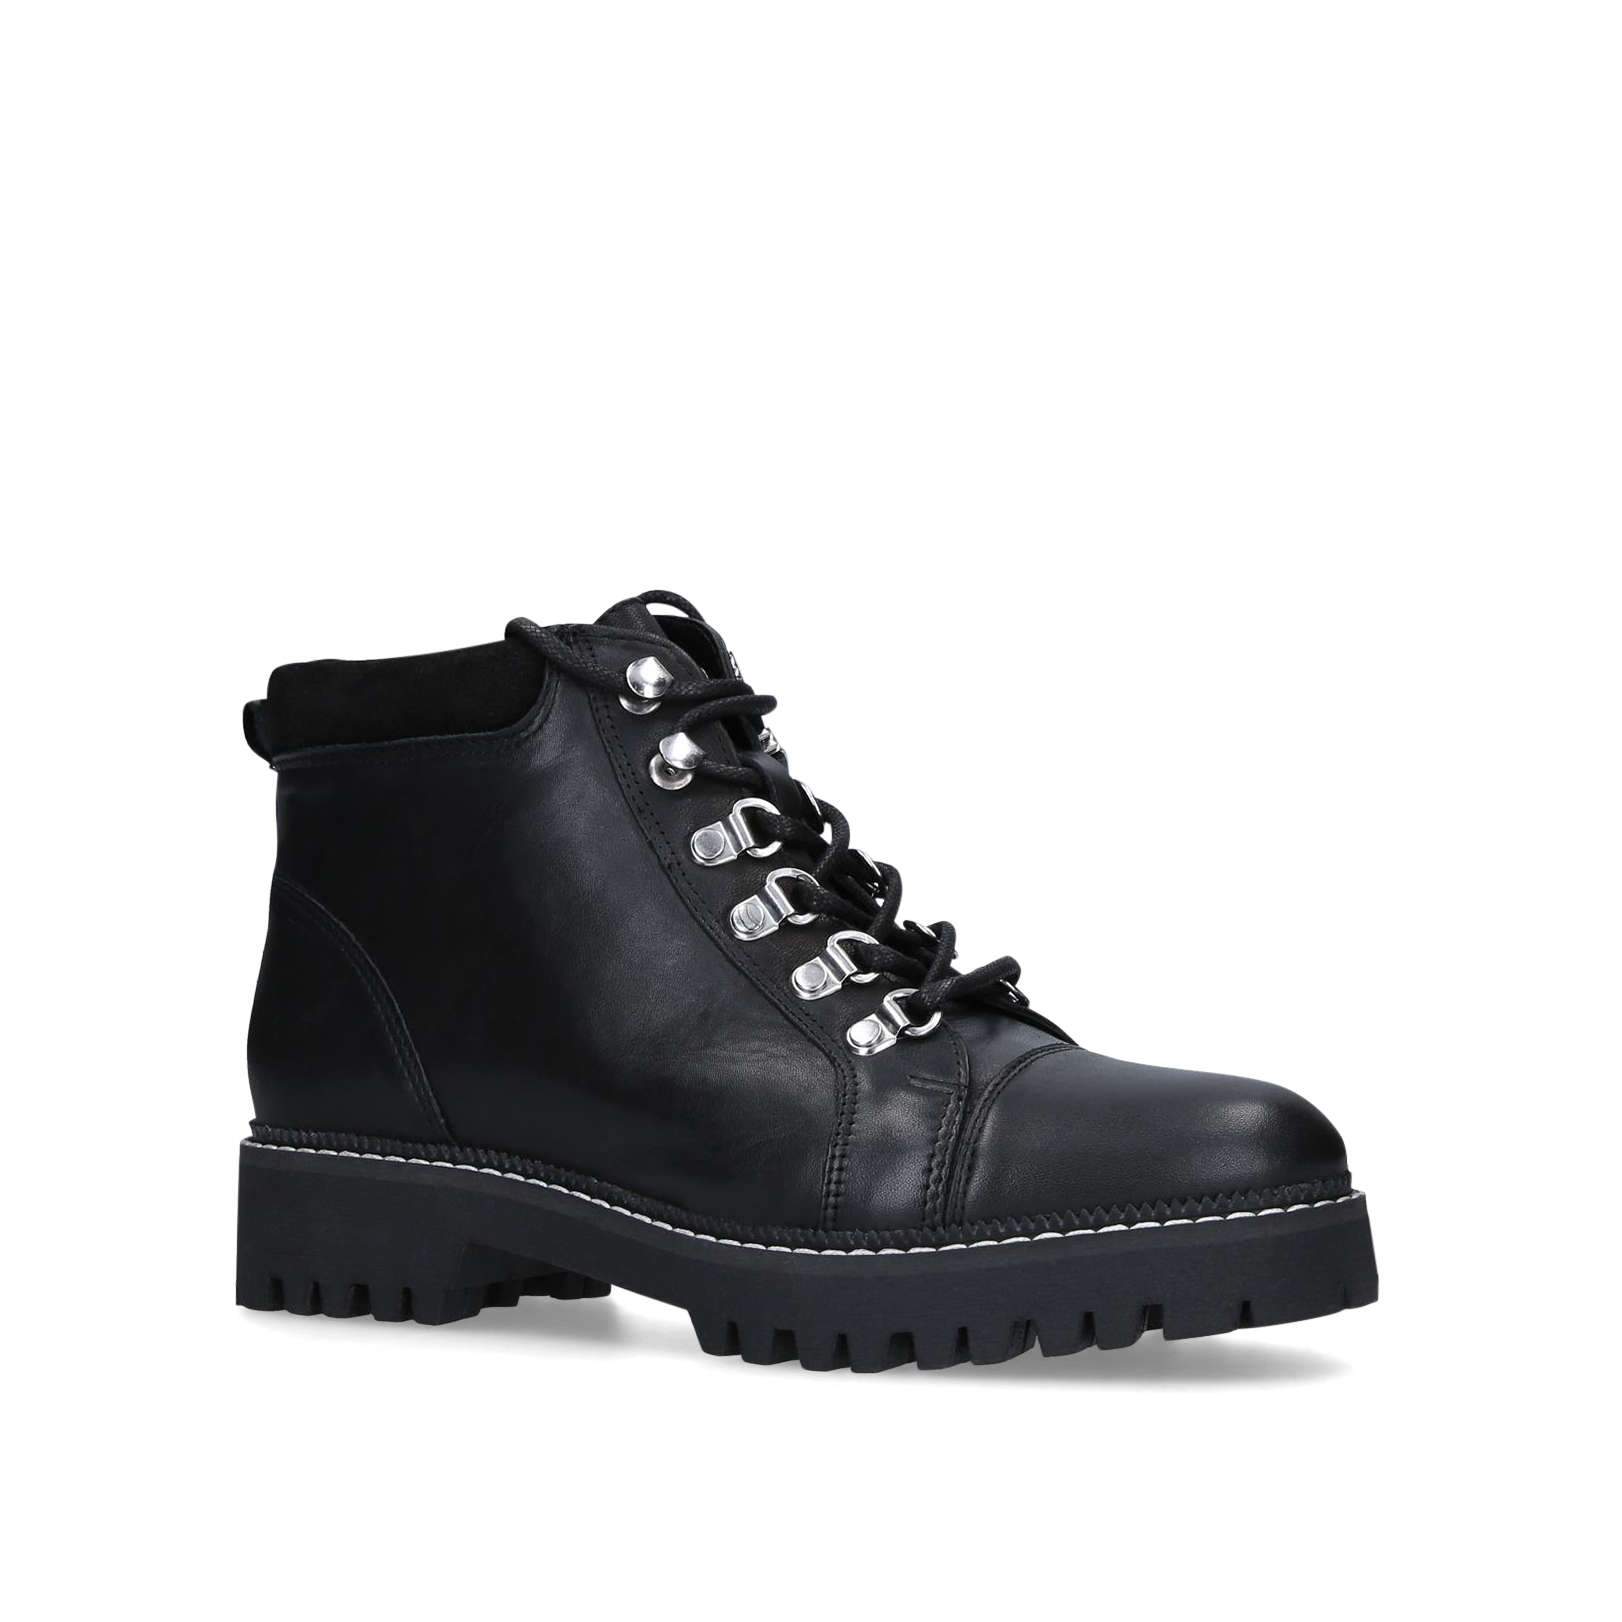 Kurt Geiger, Women's Ankle Boots, Black - Stockpoint Apparel Outlet